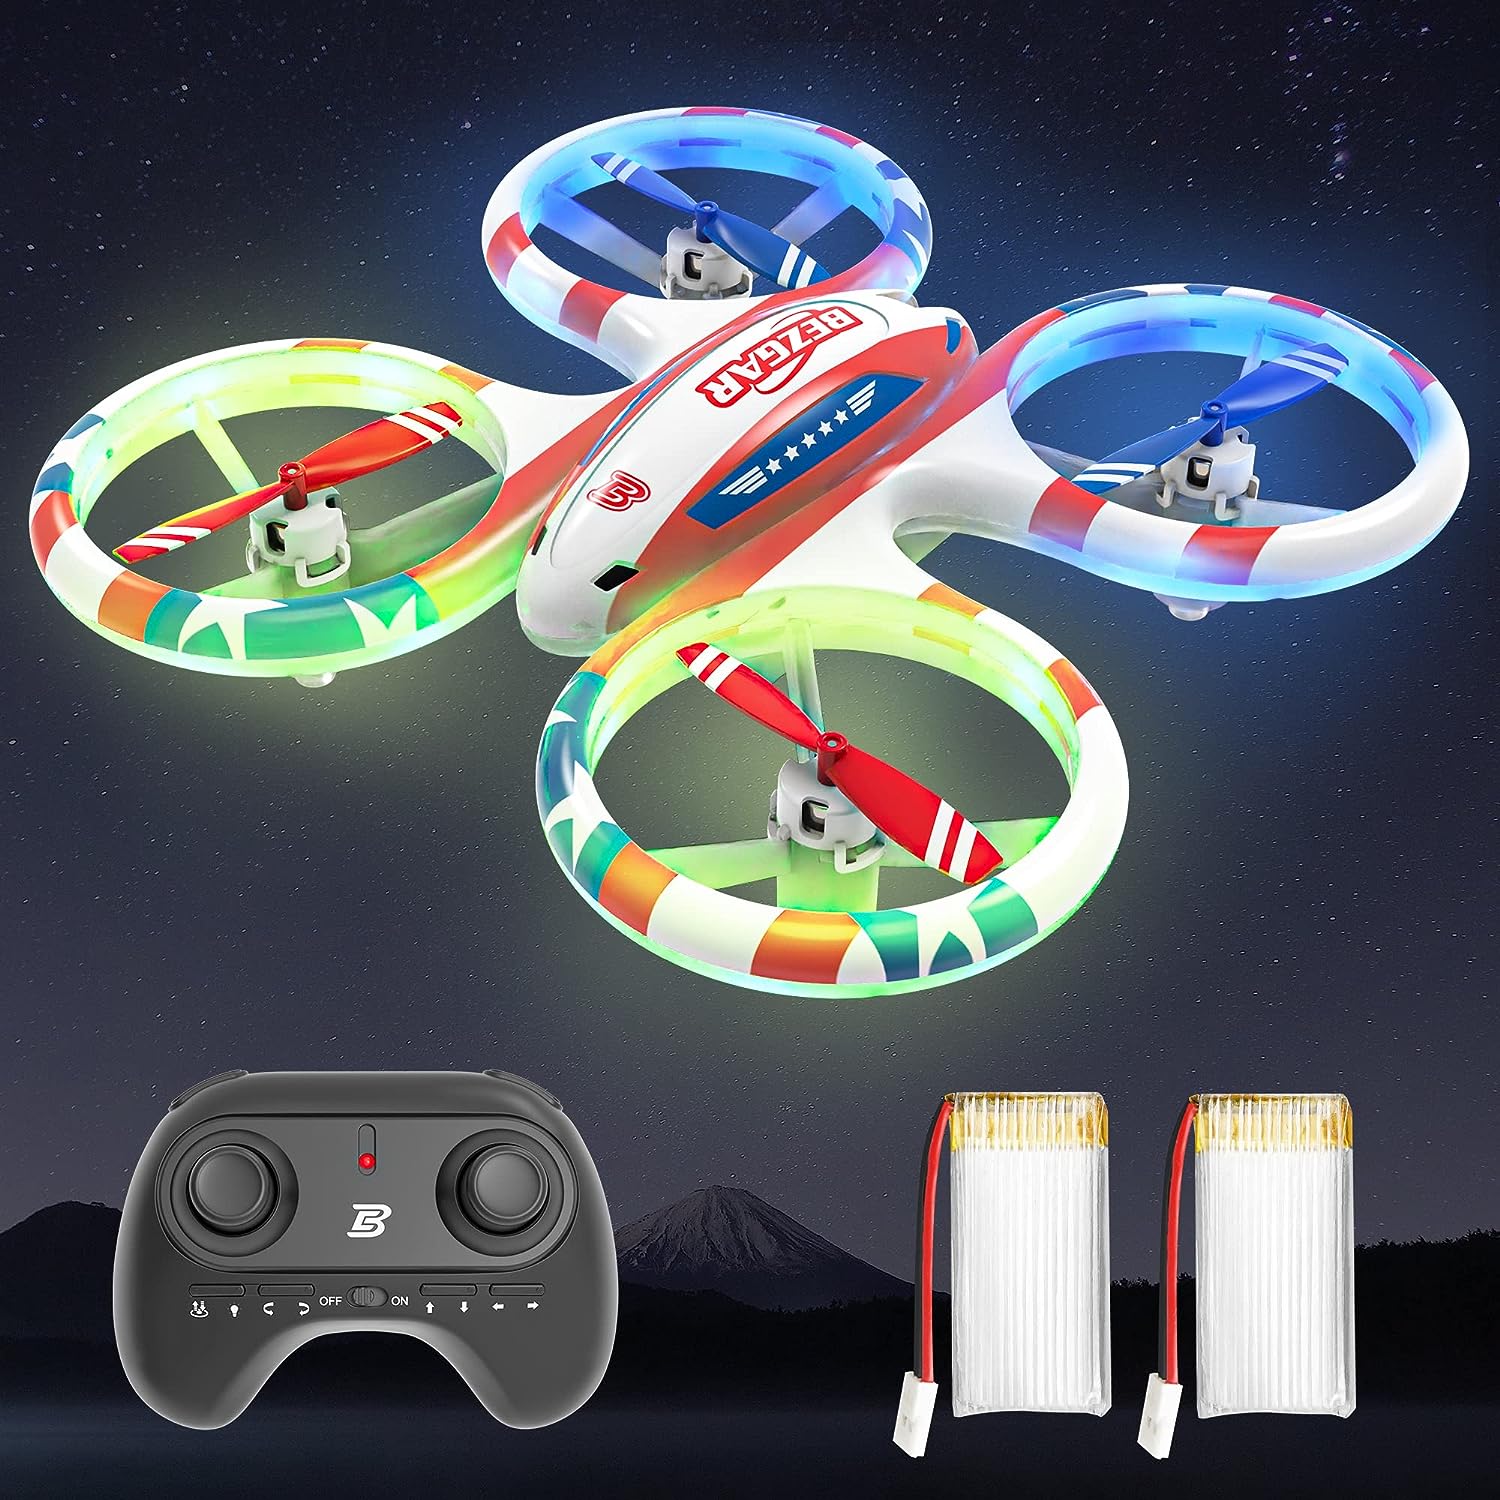 BEZGAR Drones for Kids – RC Drone Indoor, LED Remote Control Mini Drone with 3D Flip and 3 Speed Propeller Full Protect Small Drone Quadcopter for Beginners, Easy to fly Gifts for Kids